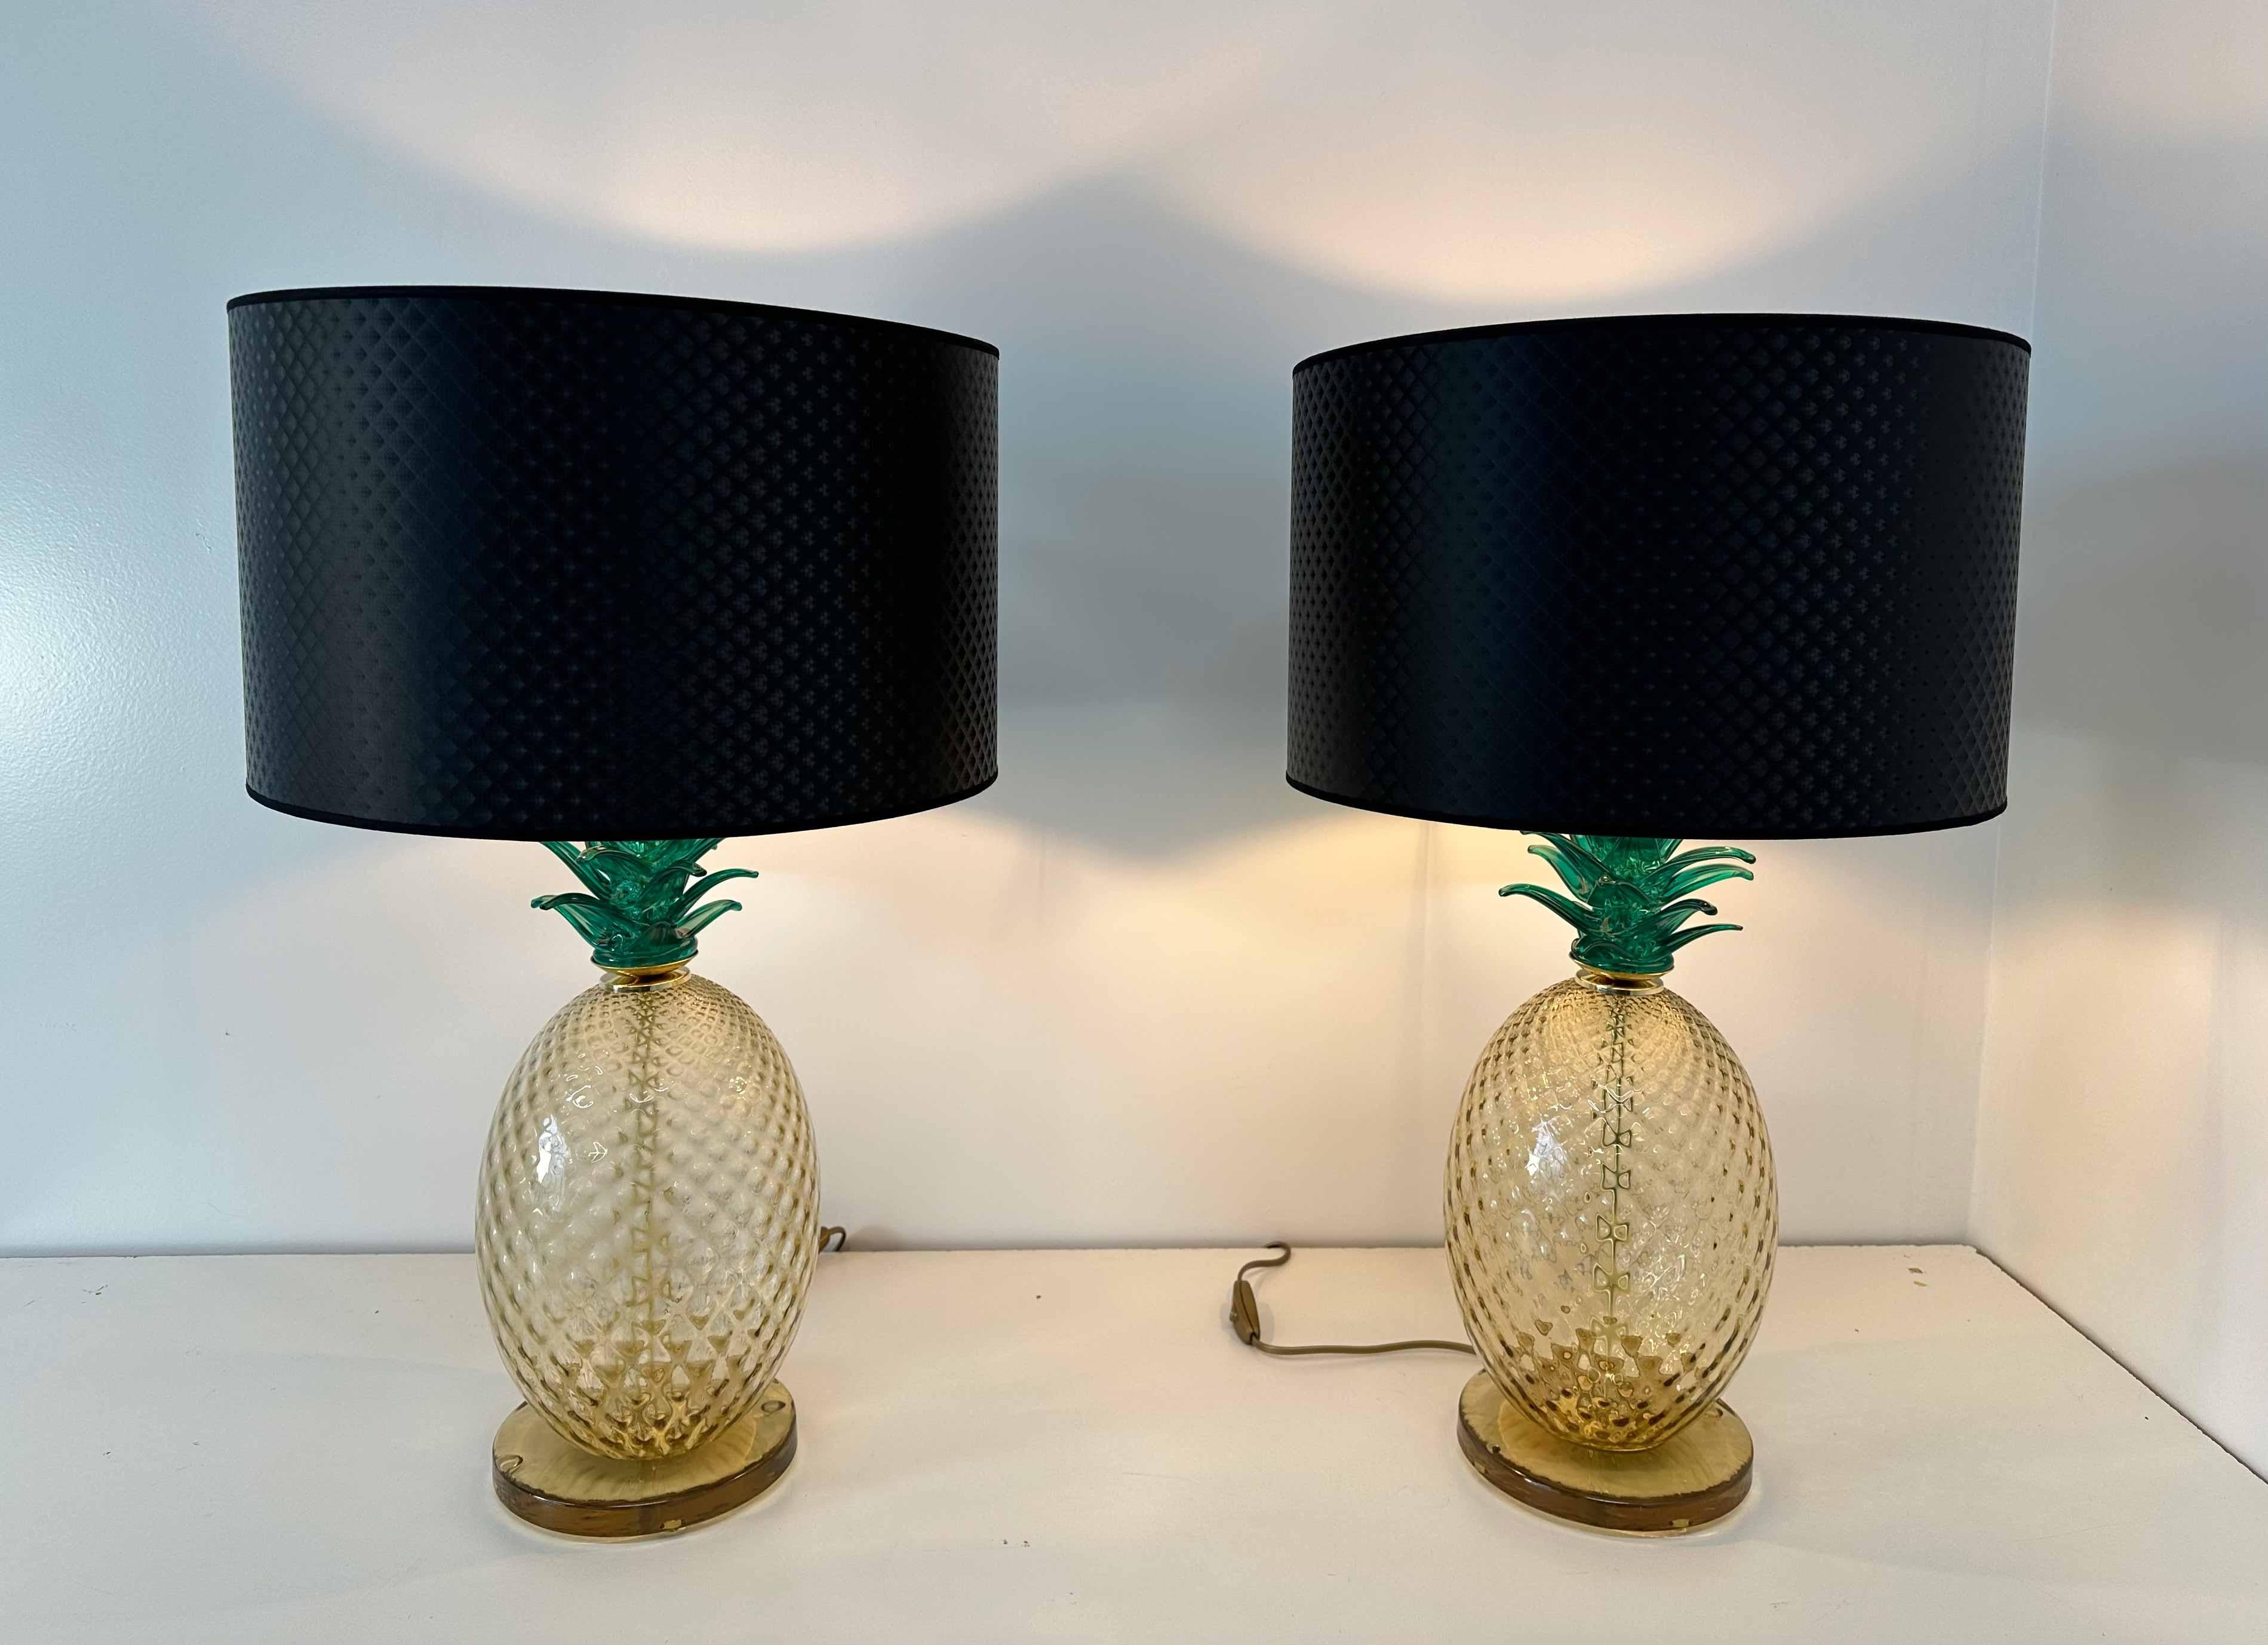 Pair of Italian Art Deco Pineapple Murano Glass Lamps with Lampshades  In Good Condition For Sale In Meda, MB